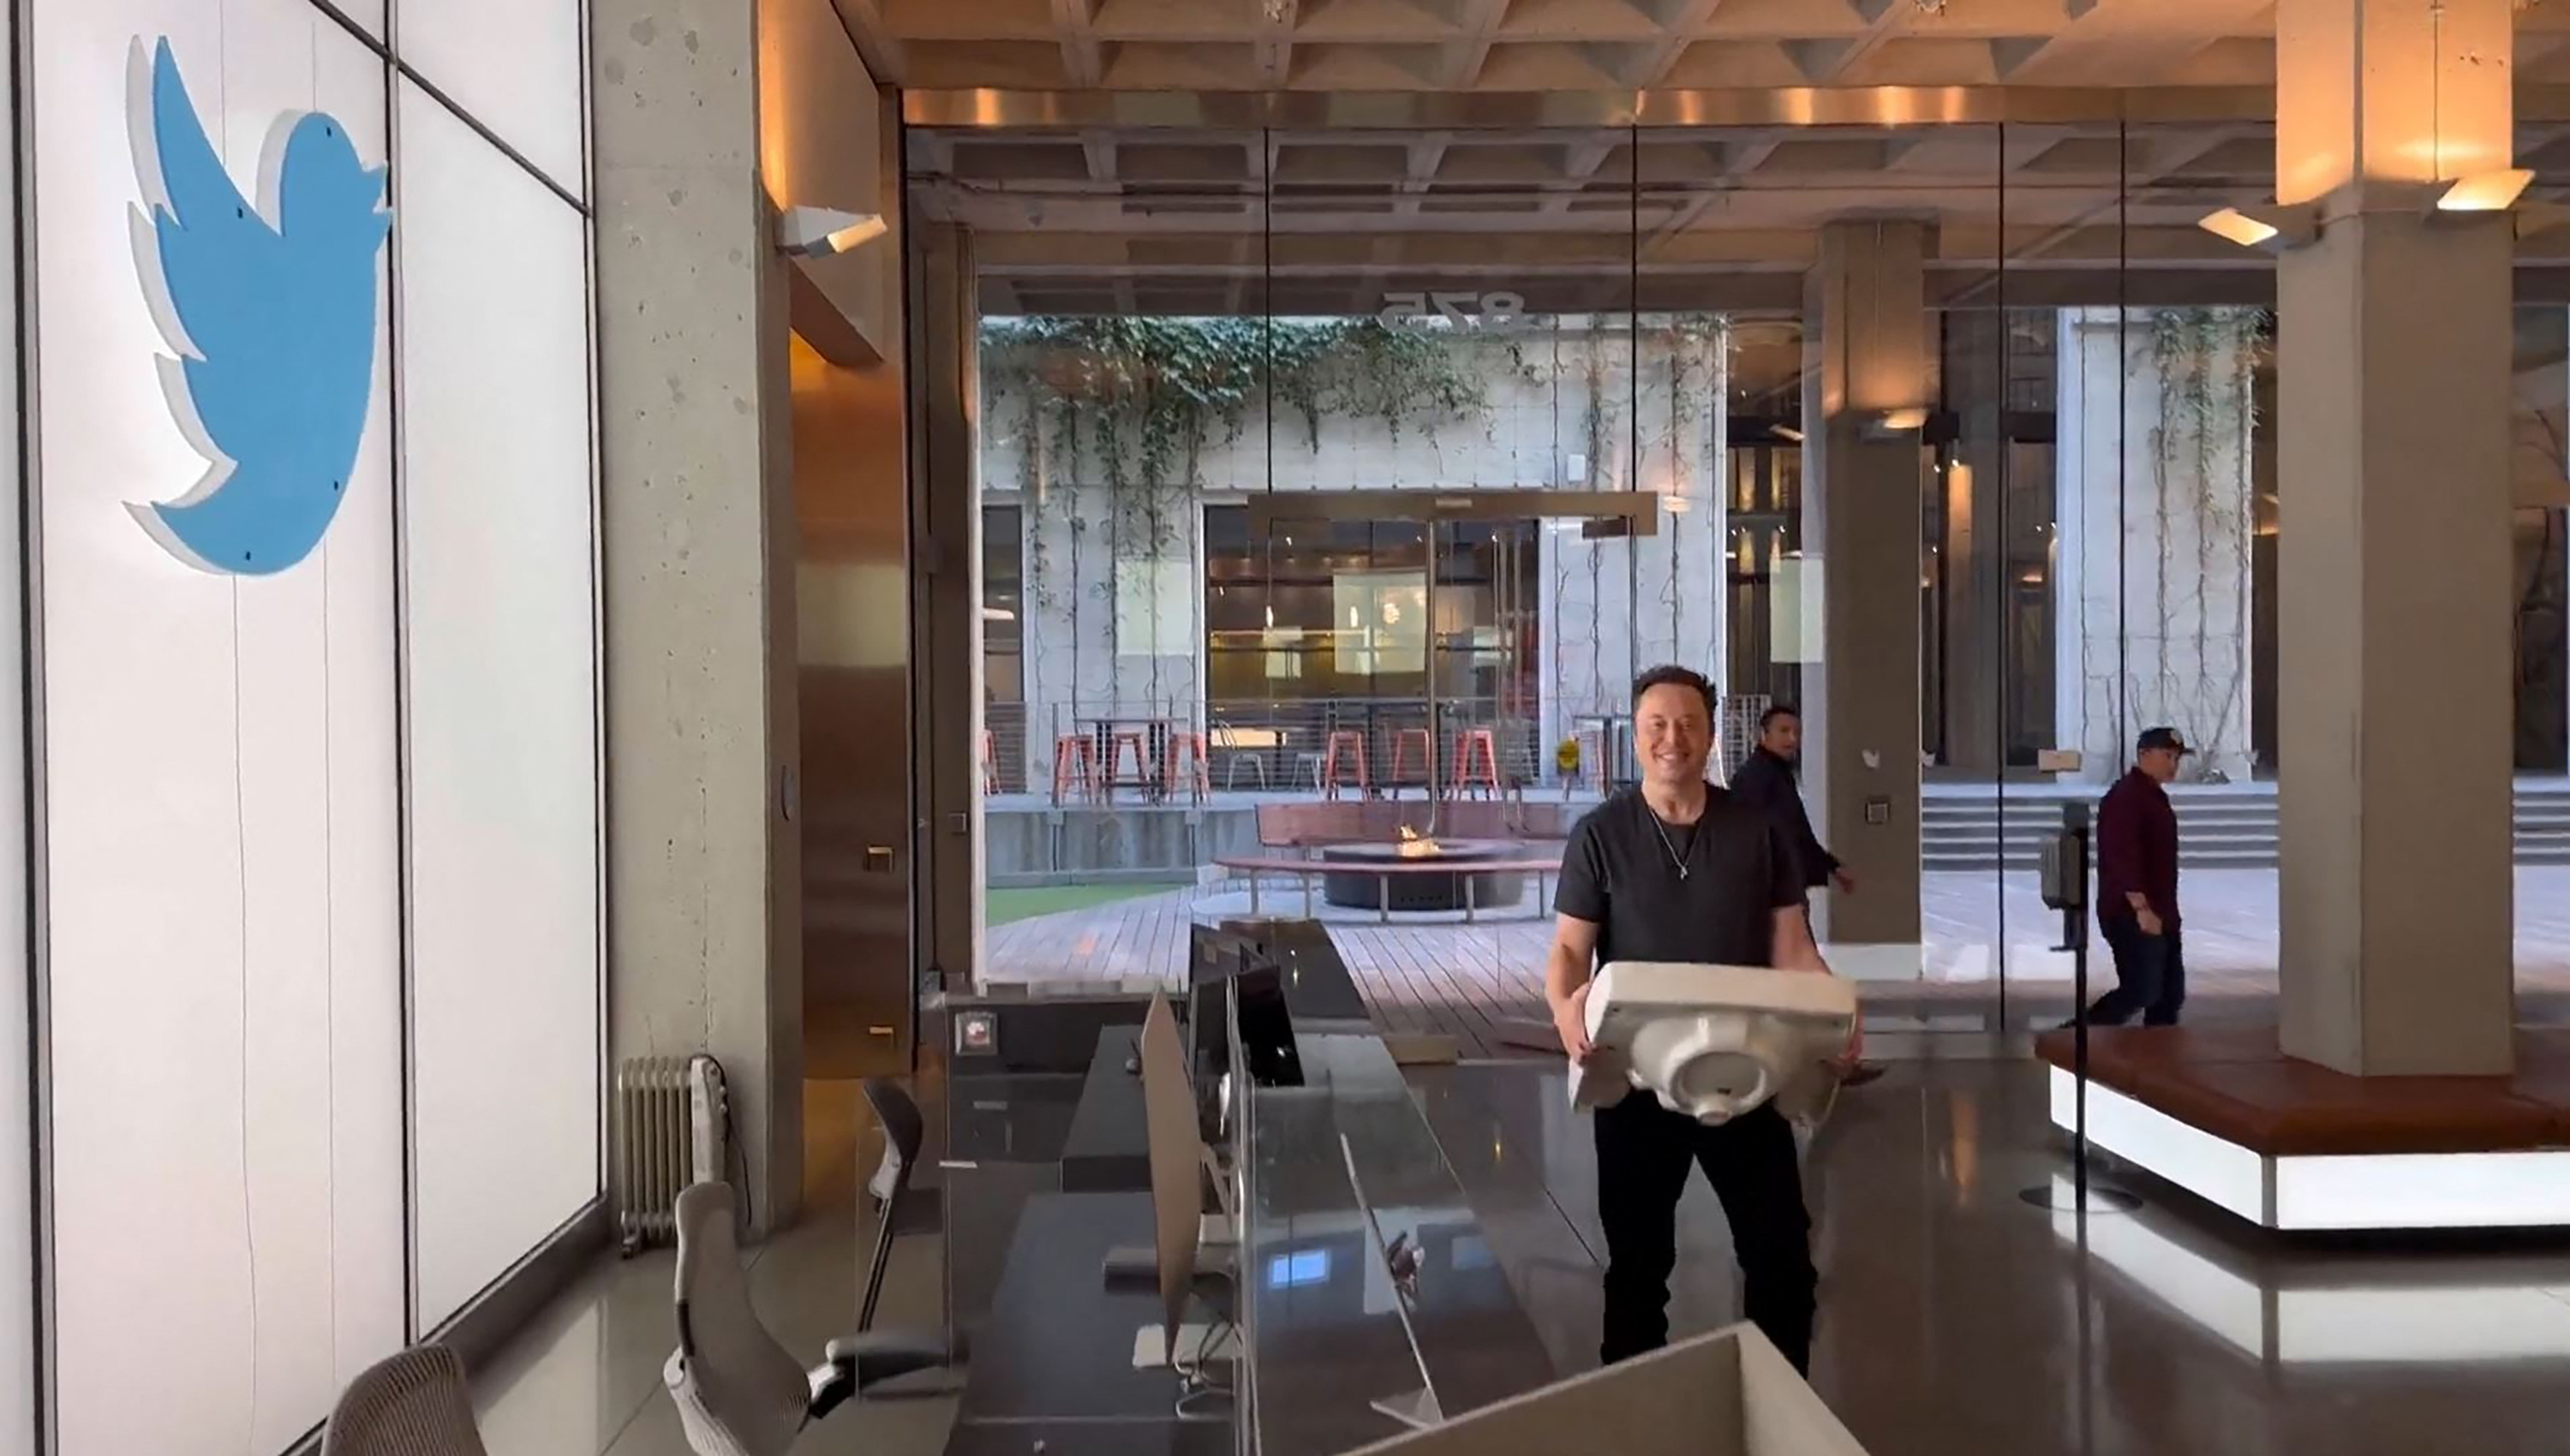 Elon Musk in the Twitter headquarters holding a sink.